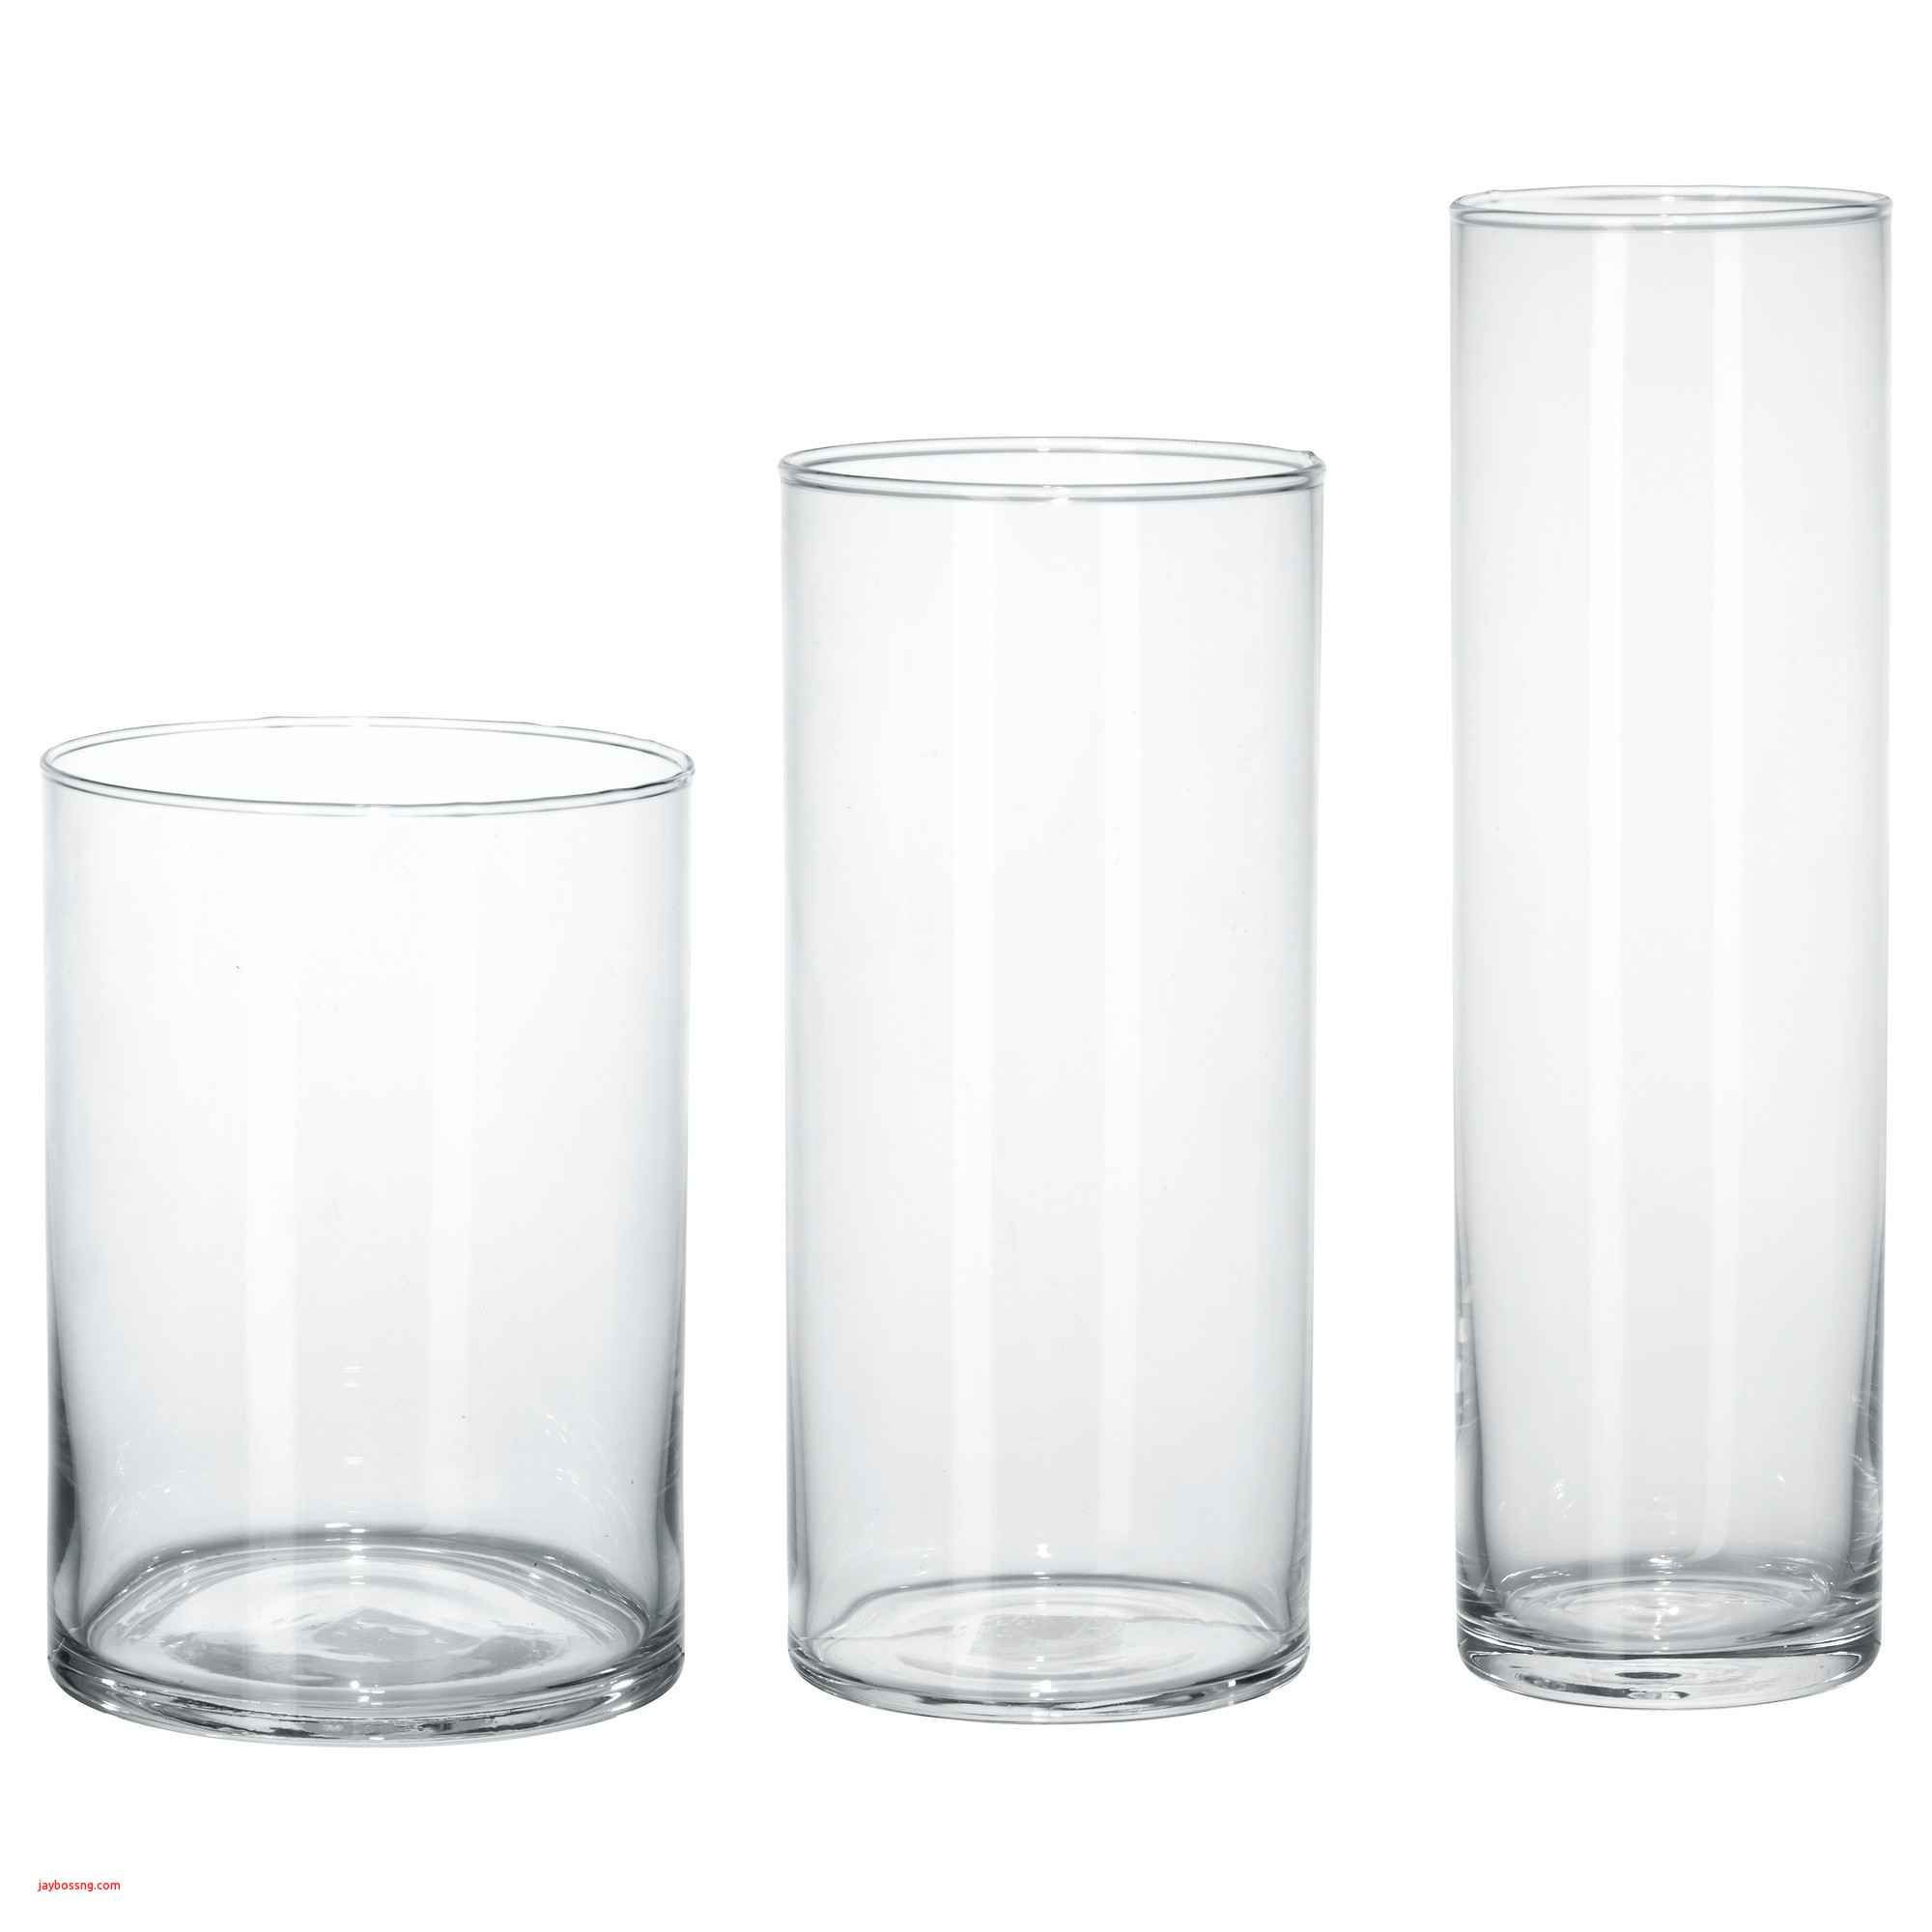 hobnail clear glass vase of brown glass vase fresh ikea white table created pe s5h vases ikea inside brown glass vase fresh ikea white table created pe s5h vases ikea vase i 0d bladet